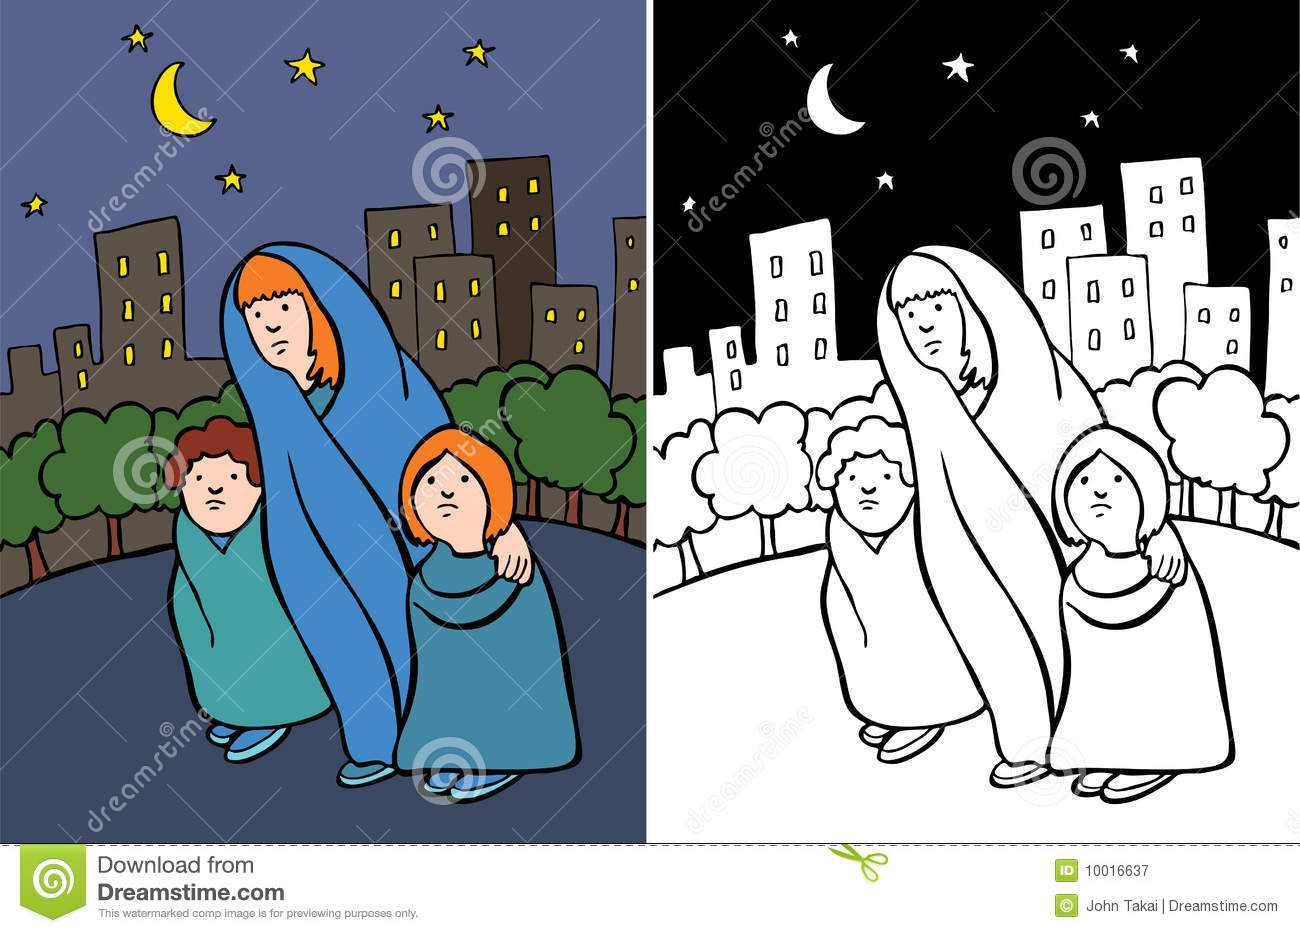 Cartoon Image Of A Homeless Family   Color And Black White Versions 